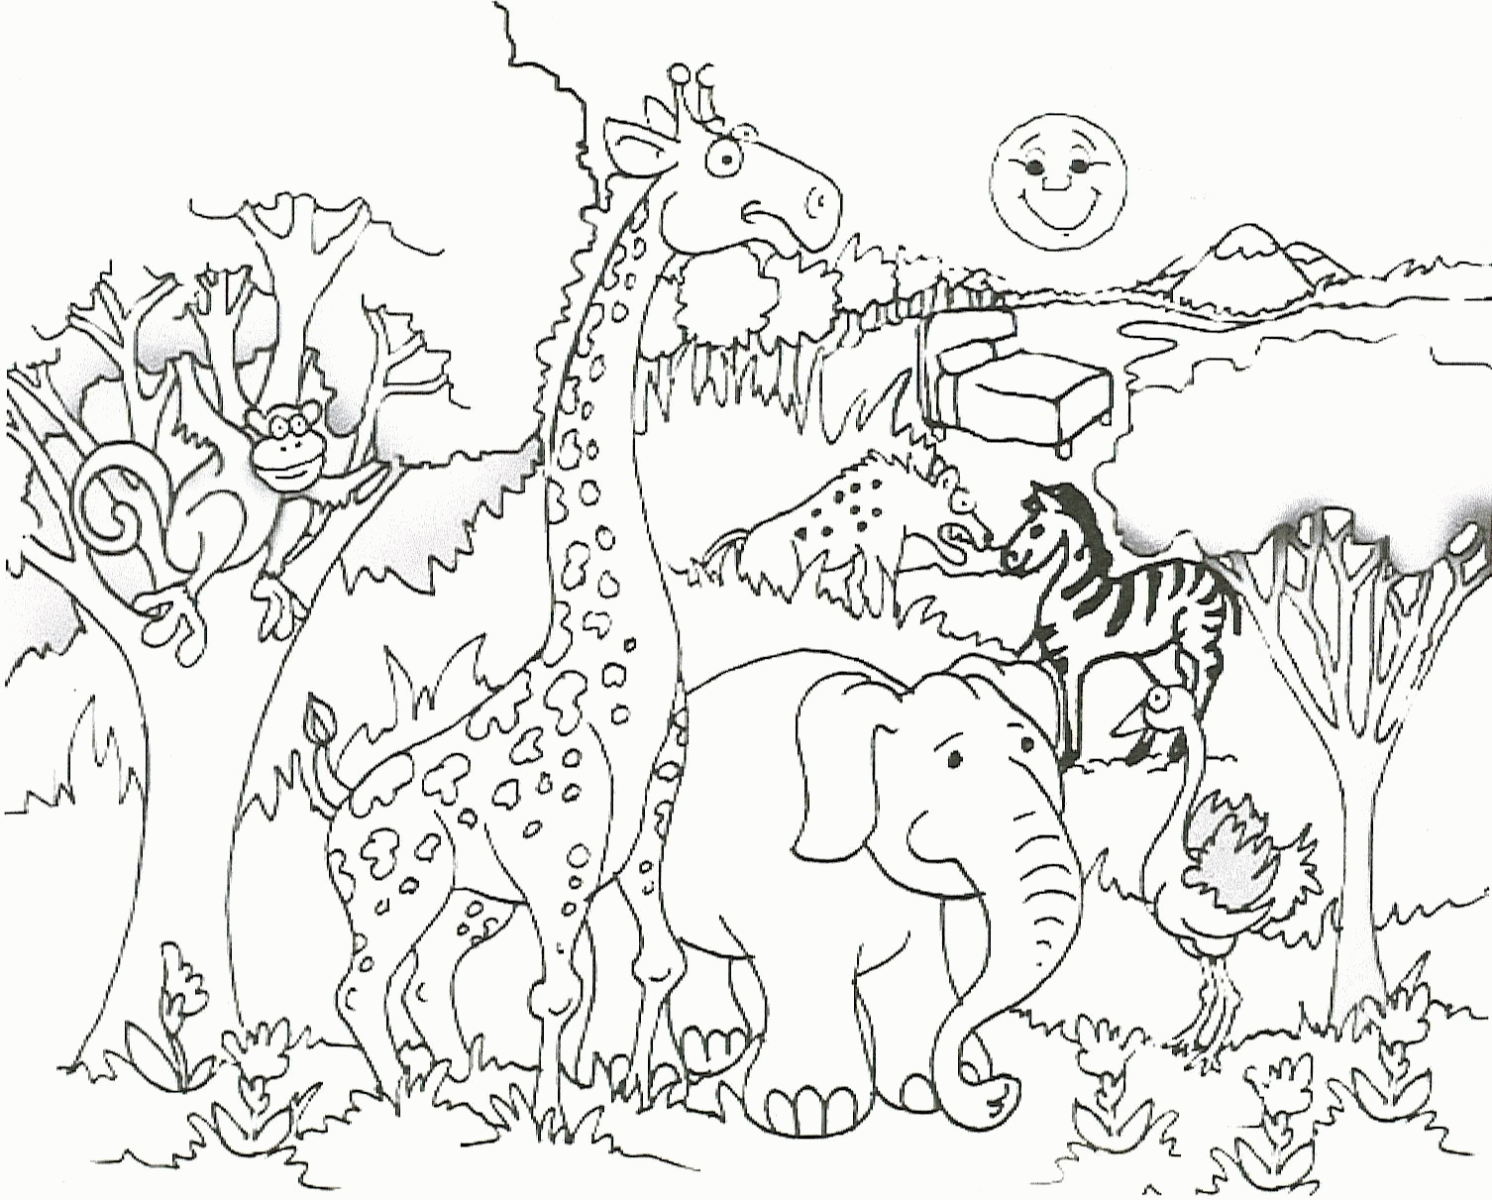 Animal Coloring Pages Pdf   Coloring Pages For All Ages   Coloring ...